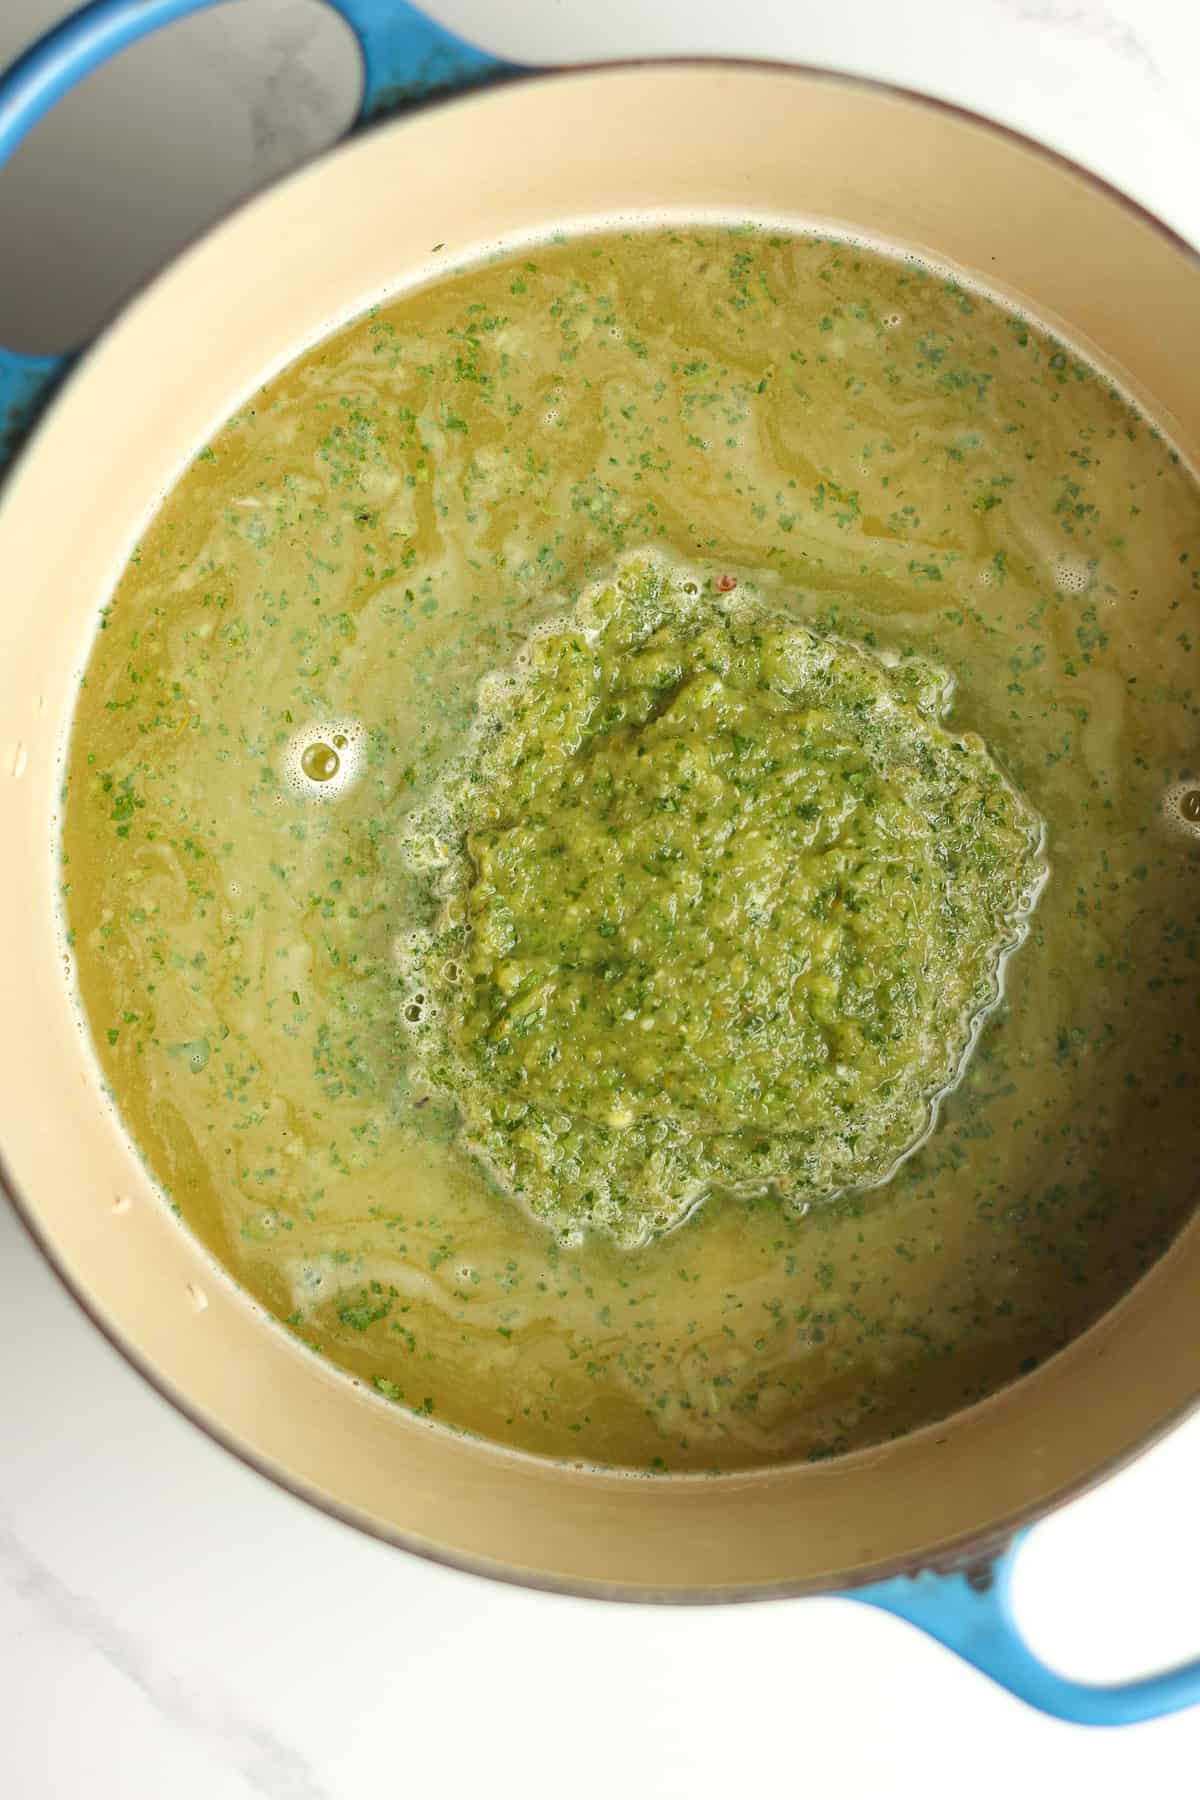 A stock pot of the rice with the green mixture poured on top.